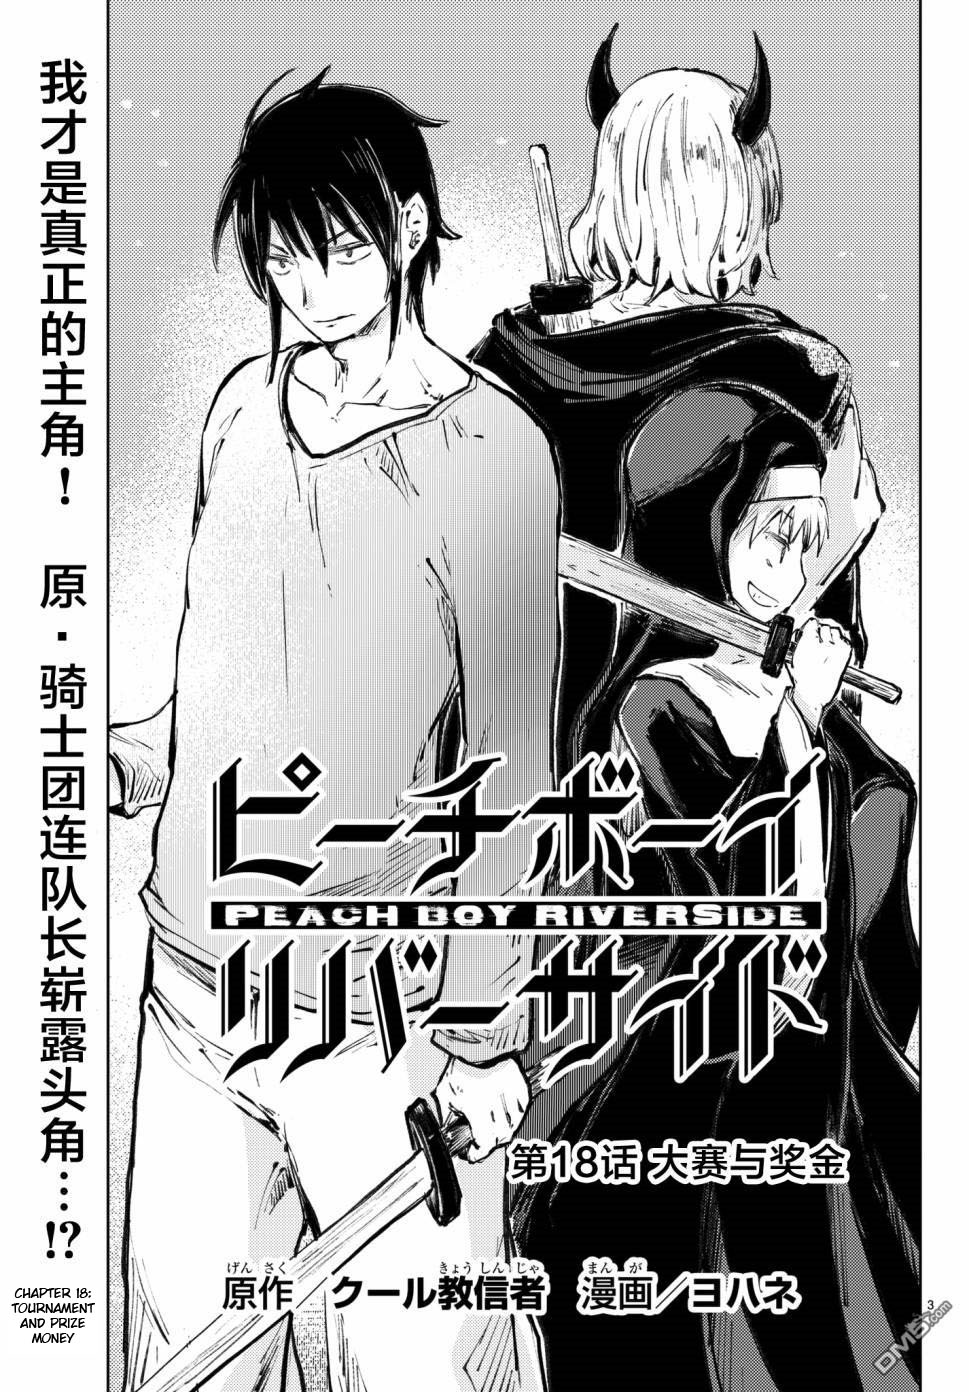 Peach Boy Riverside Chapter 18: Tournament And Prize Money - Picture 3